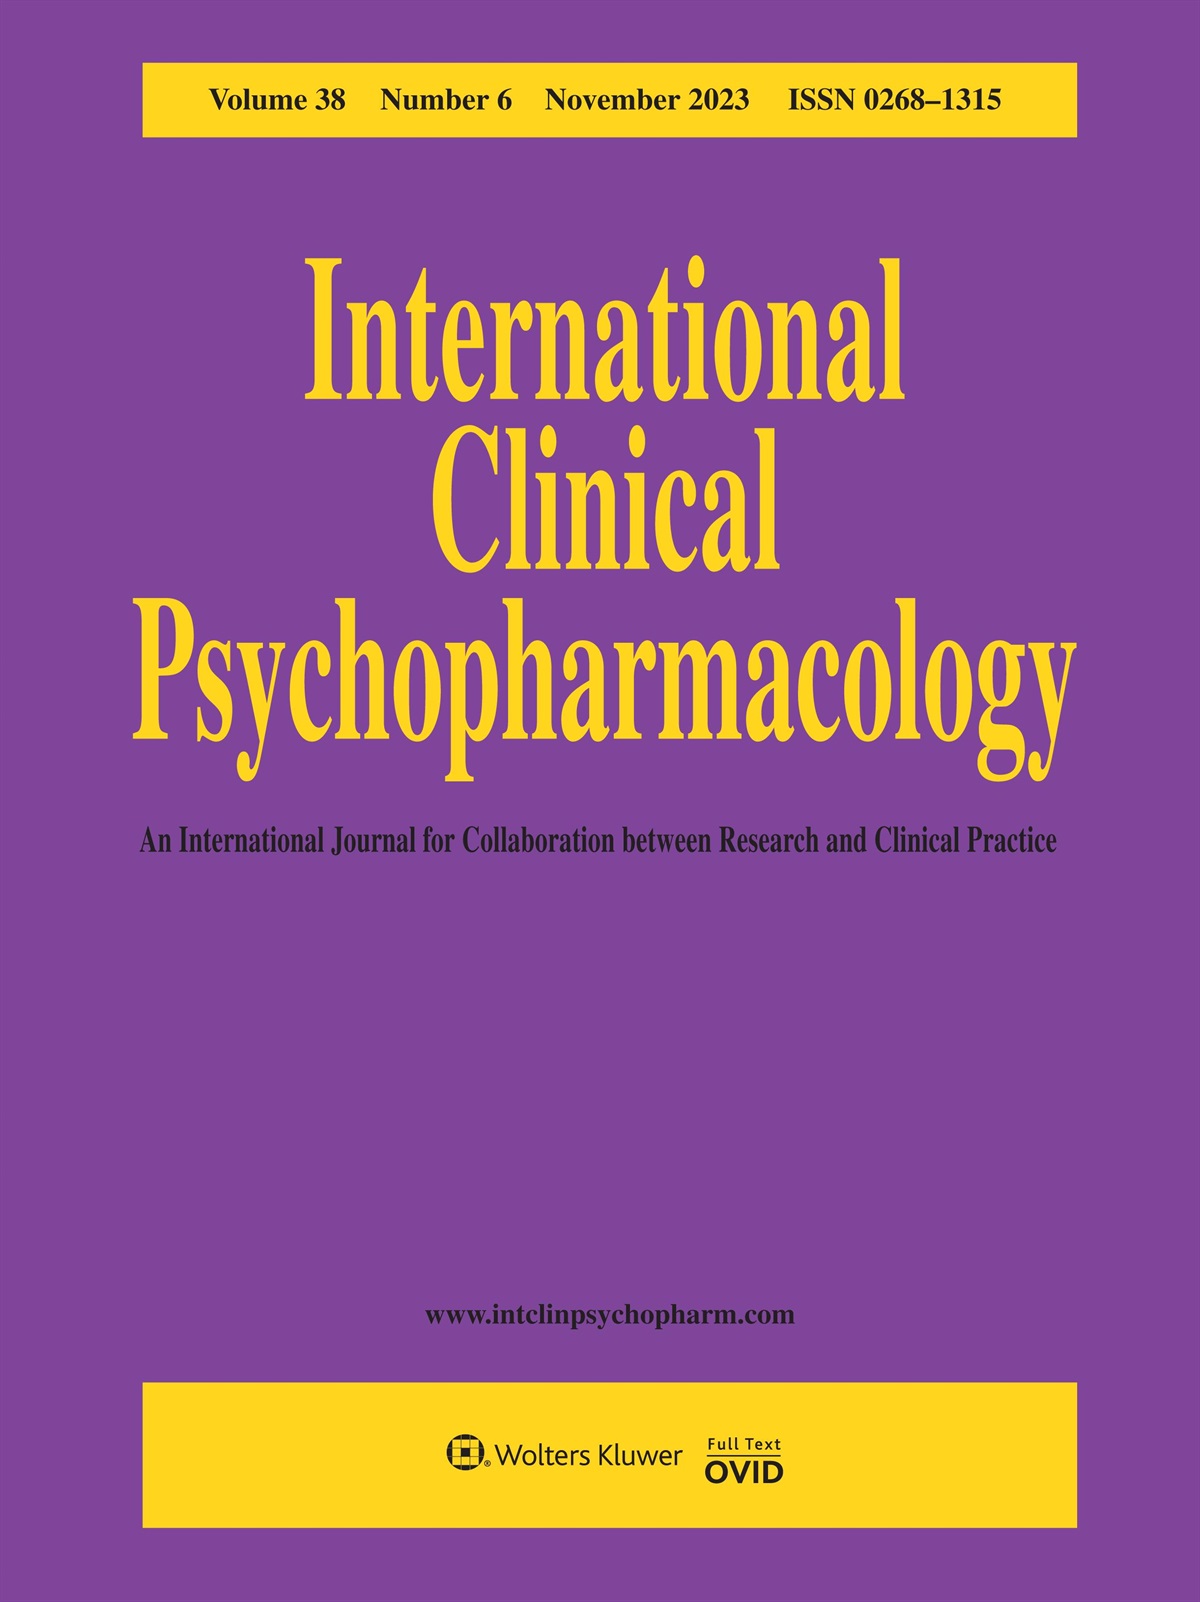 The interplay of psychopharmacology and medical conditions